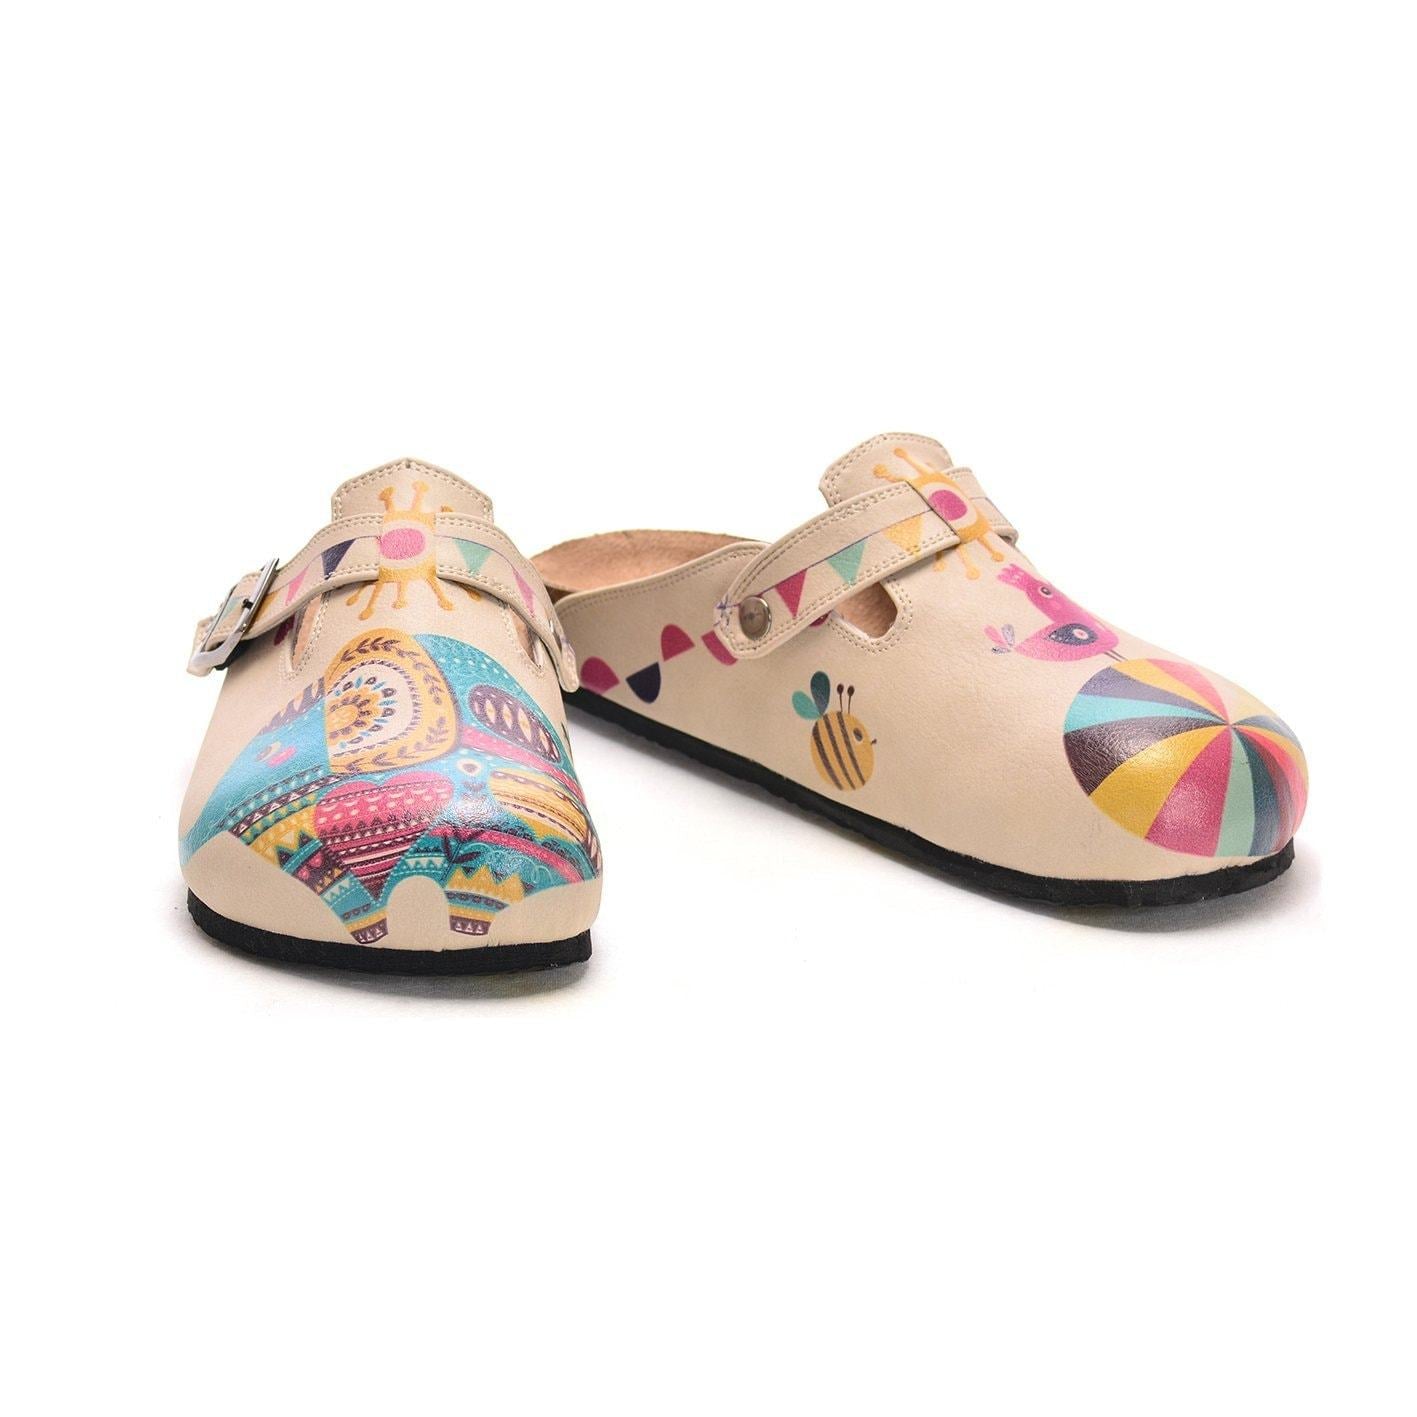 Blue, Pink Orange Color Elephant and Rainbow Round Ball and Purple Bird Patterned Clogs - CAL301